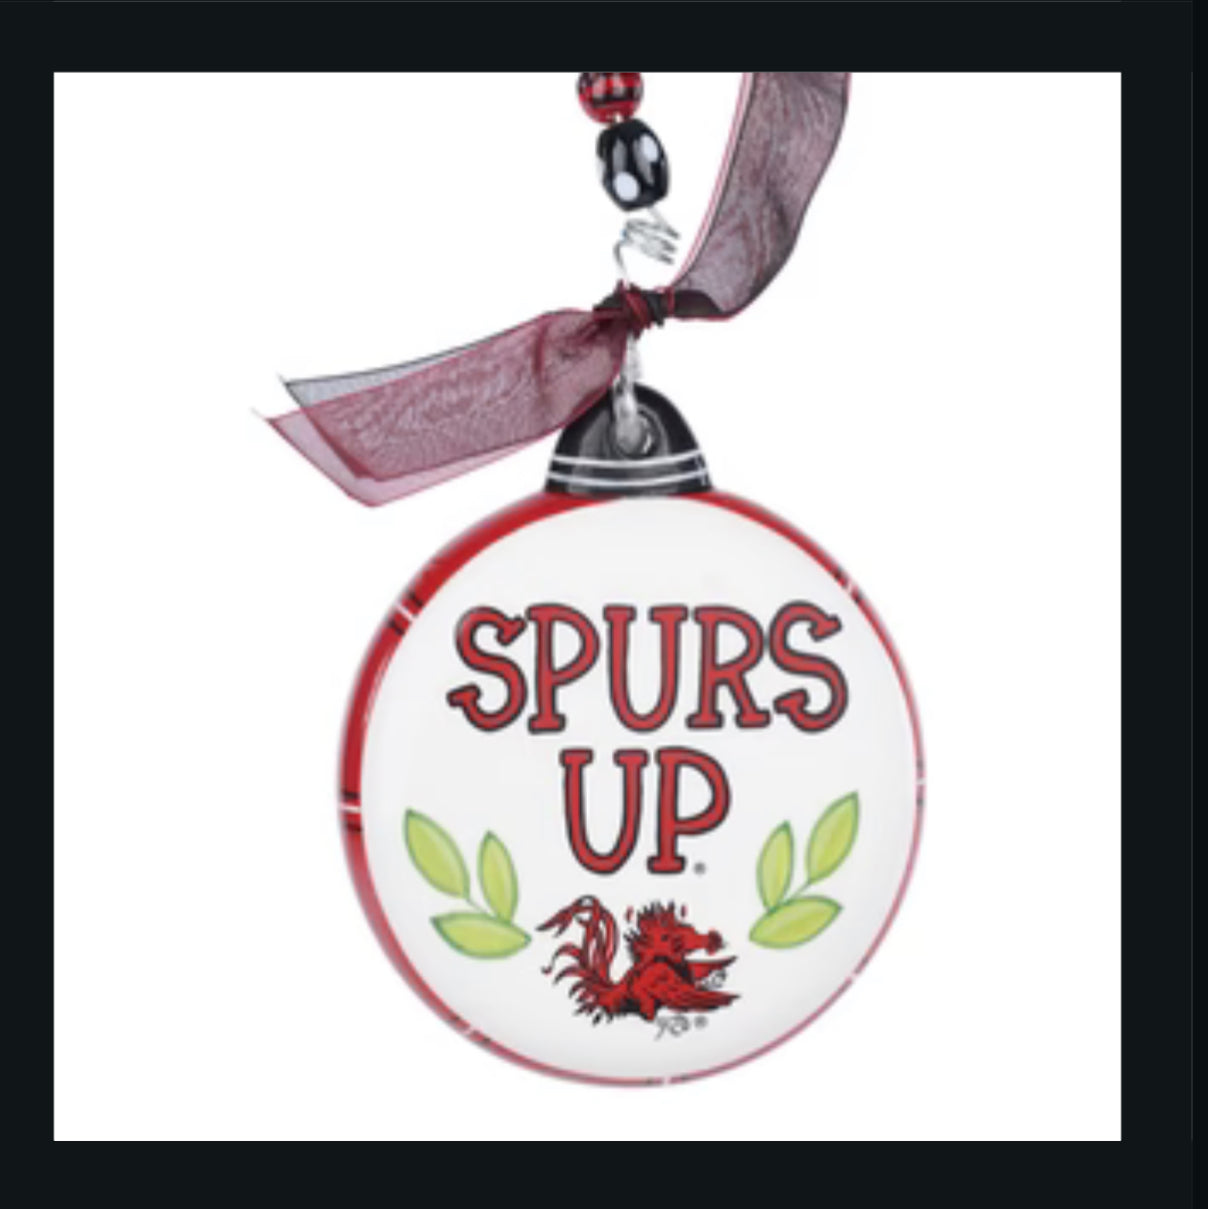 Christmas ornament featuring "Spurs Up" in garnet lettering with a gamecock.